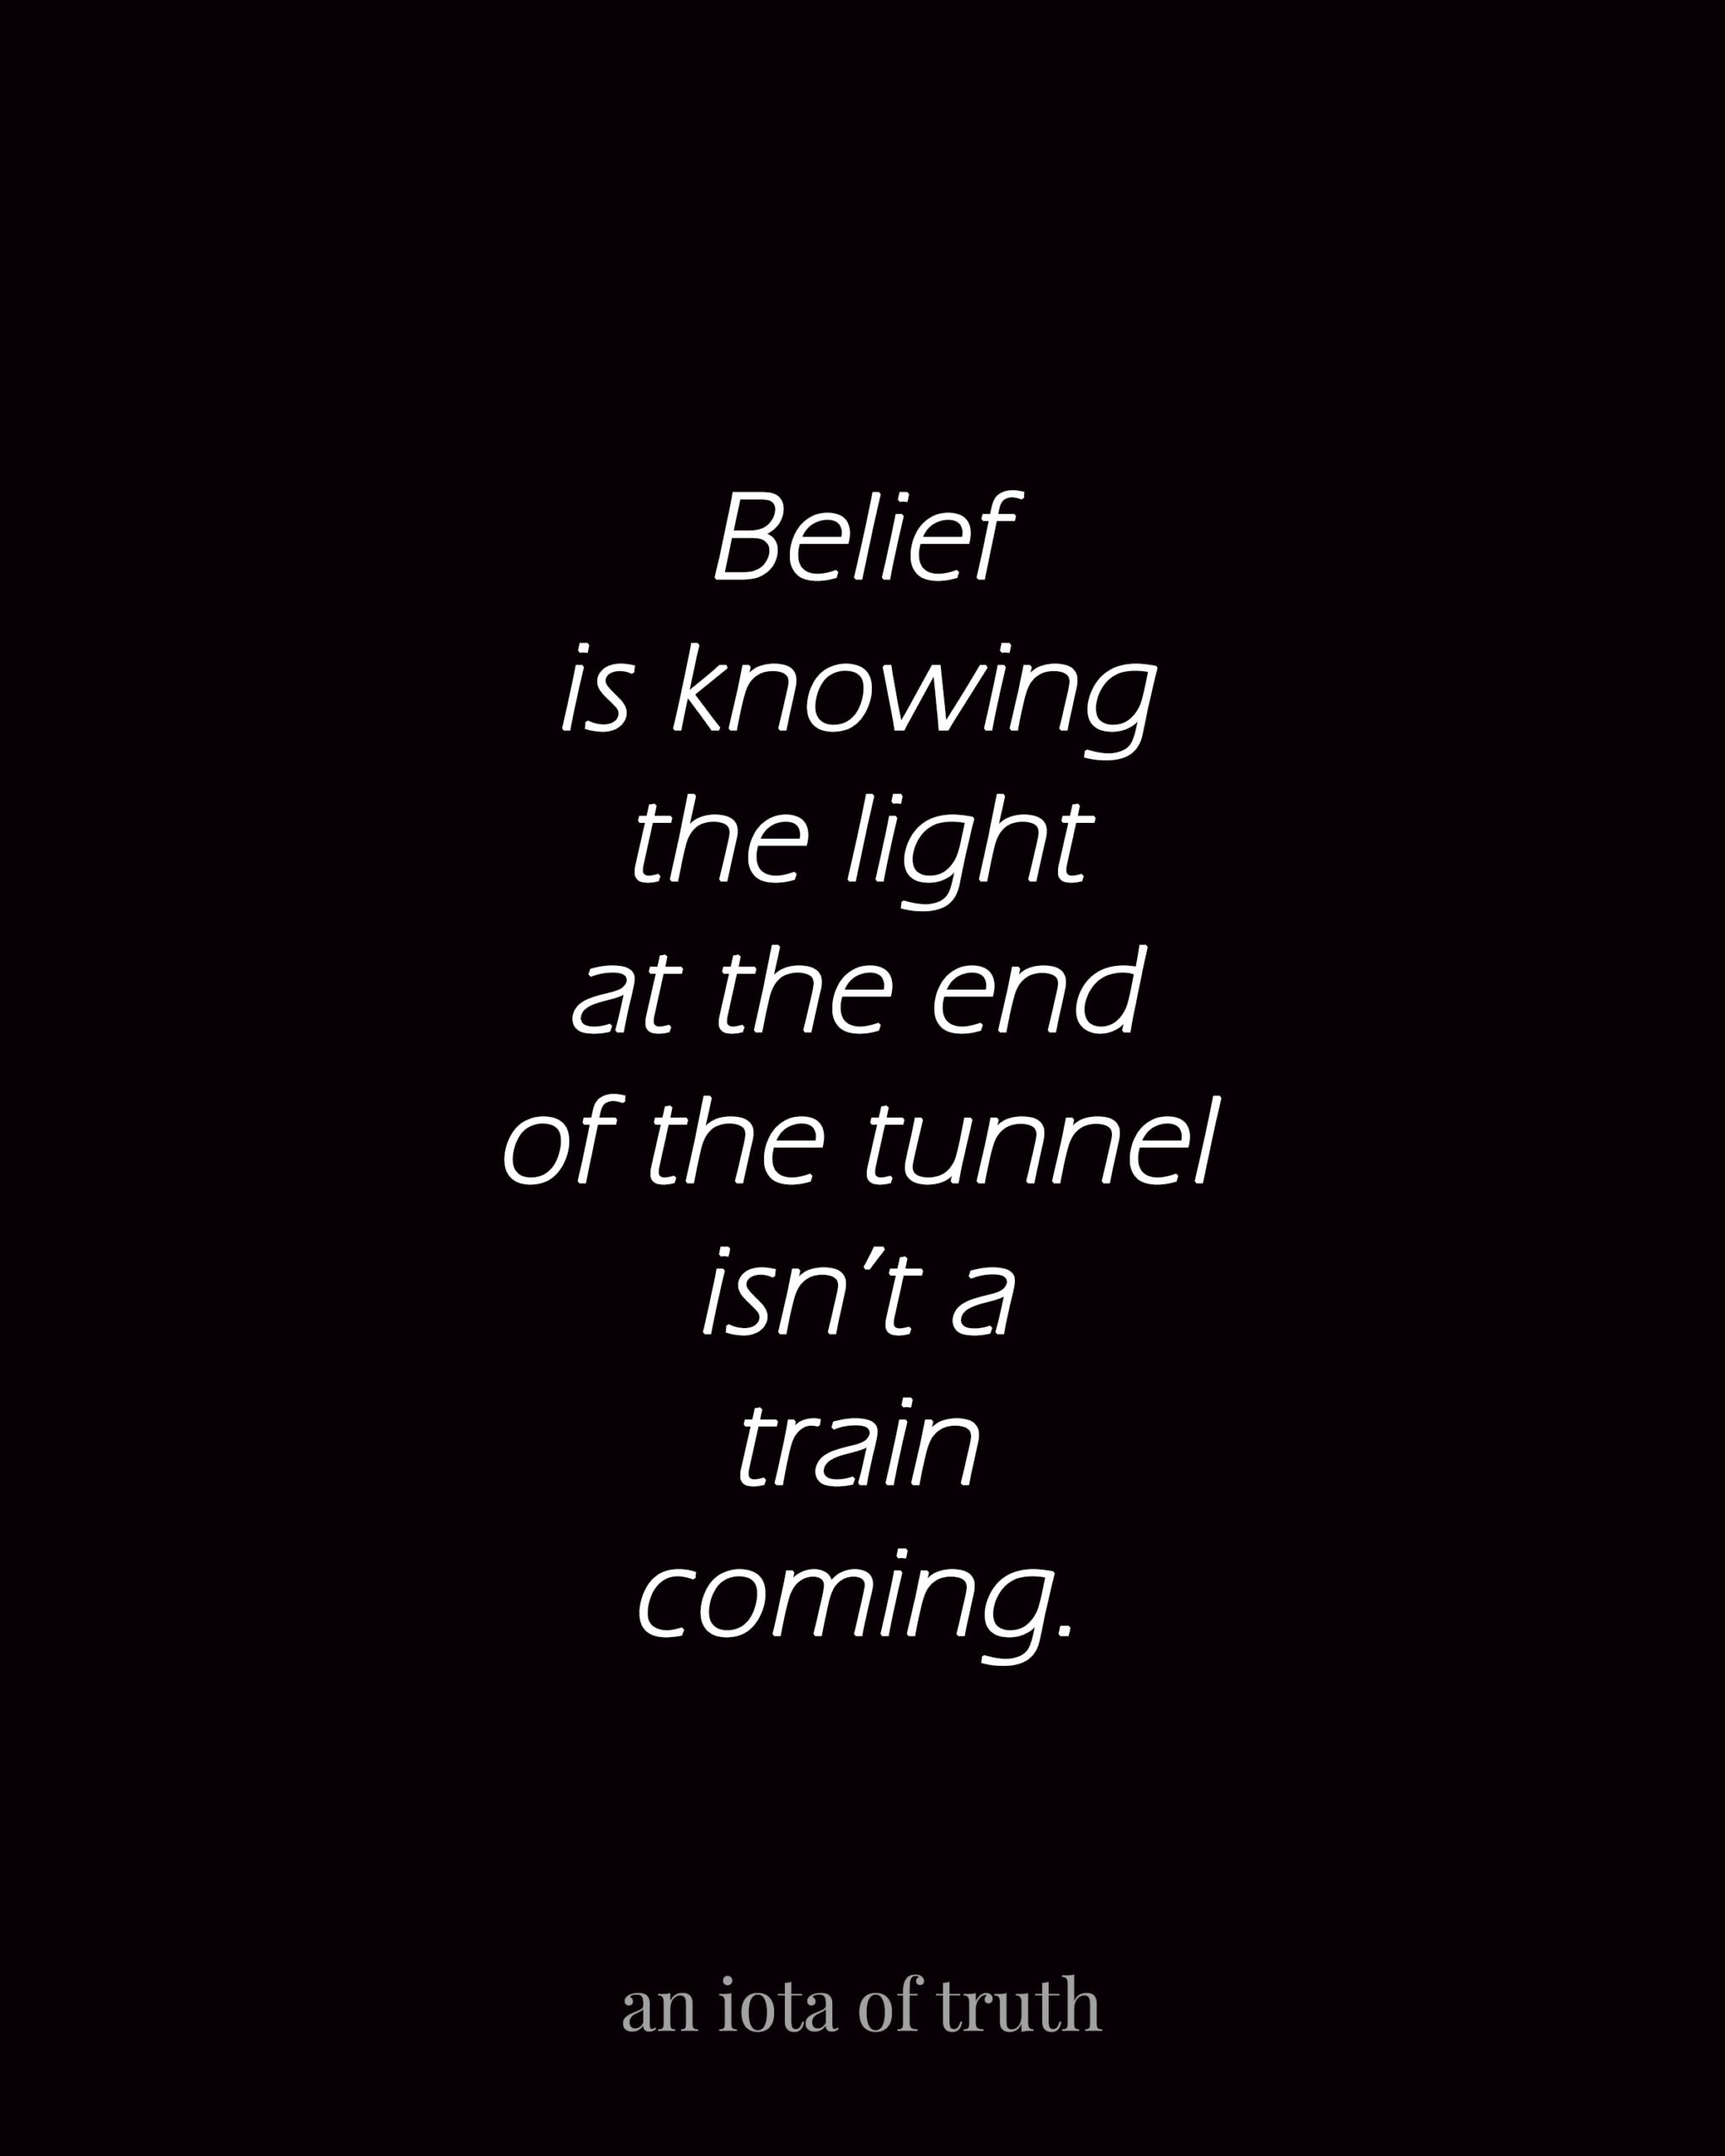 Belief is knowing the light at the end of the tunnel isn't a train coming.